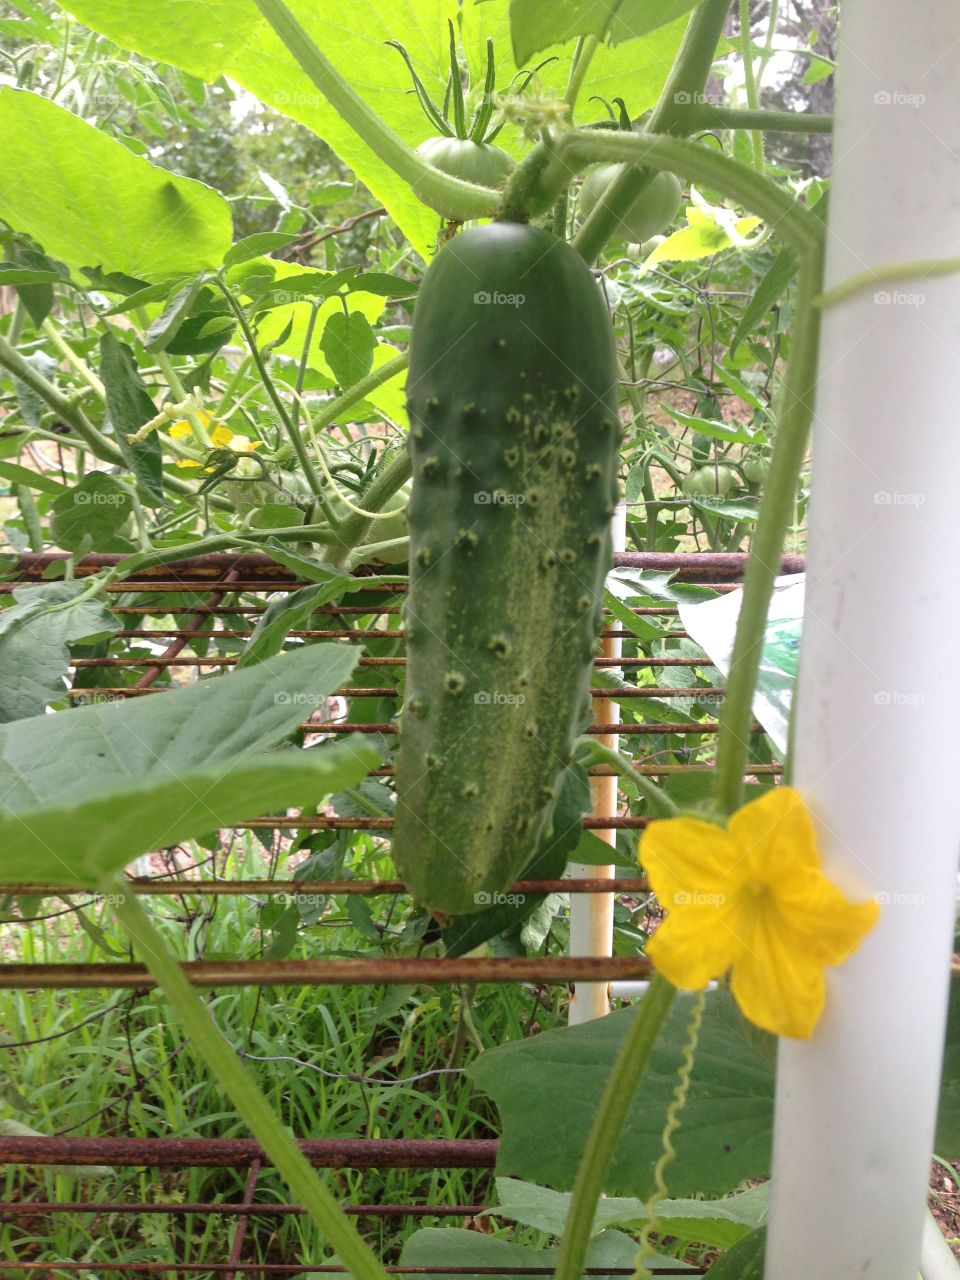 Cucumbers are coming along nicely!